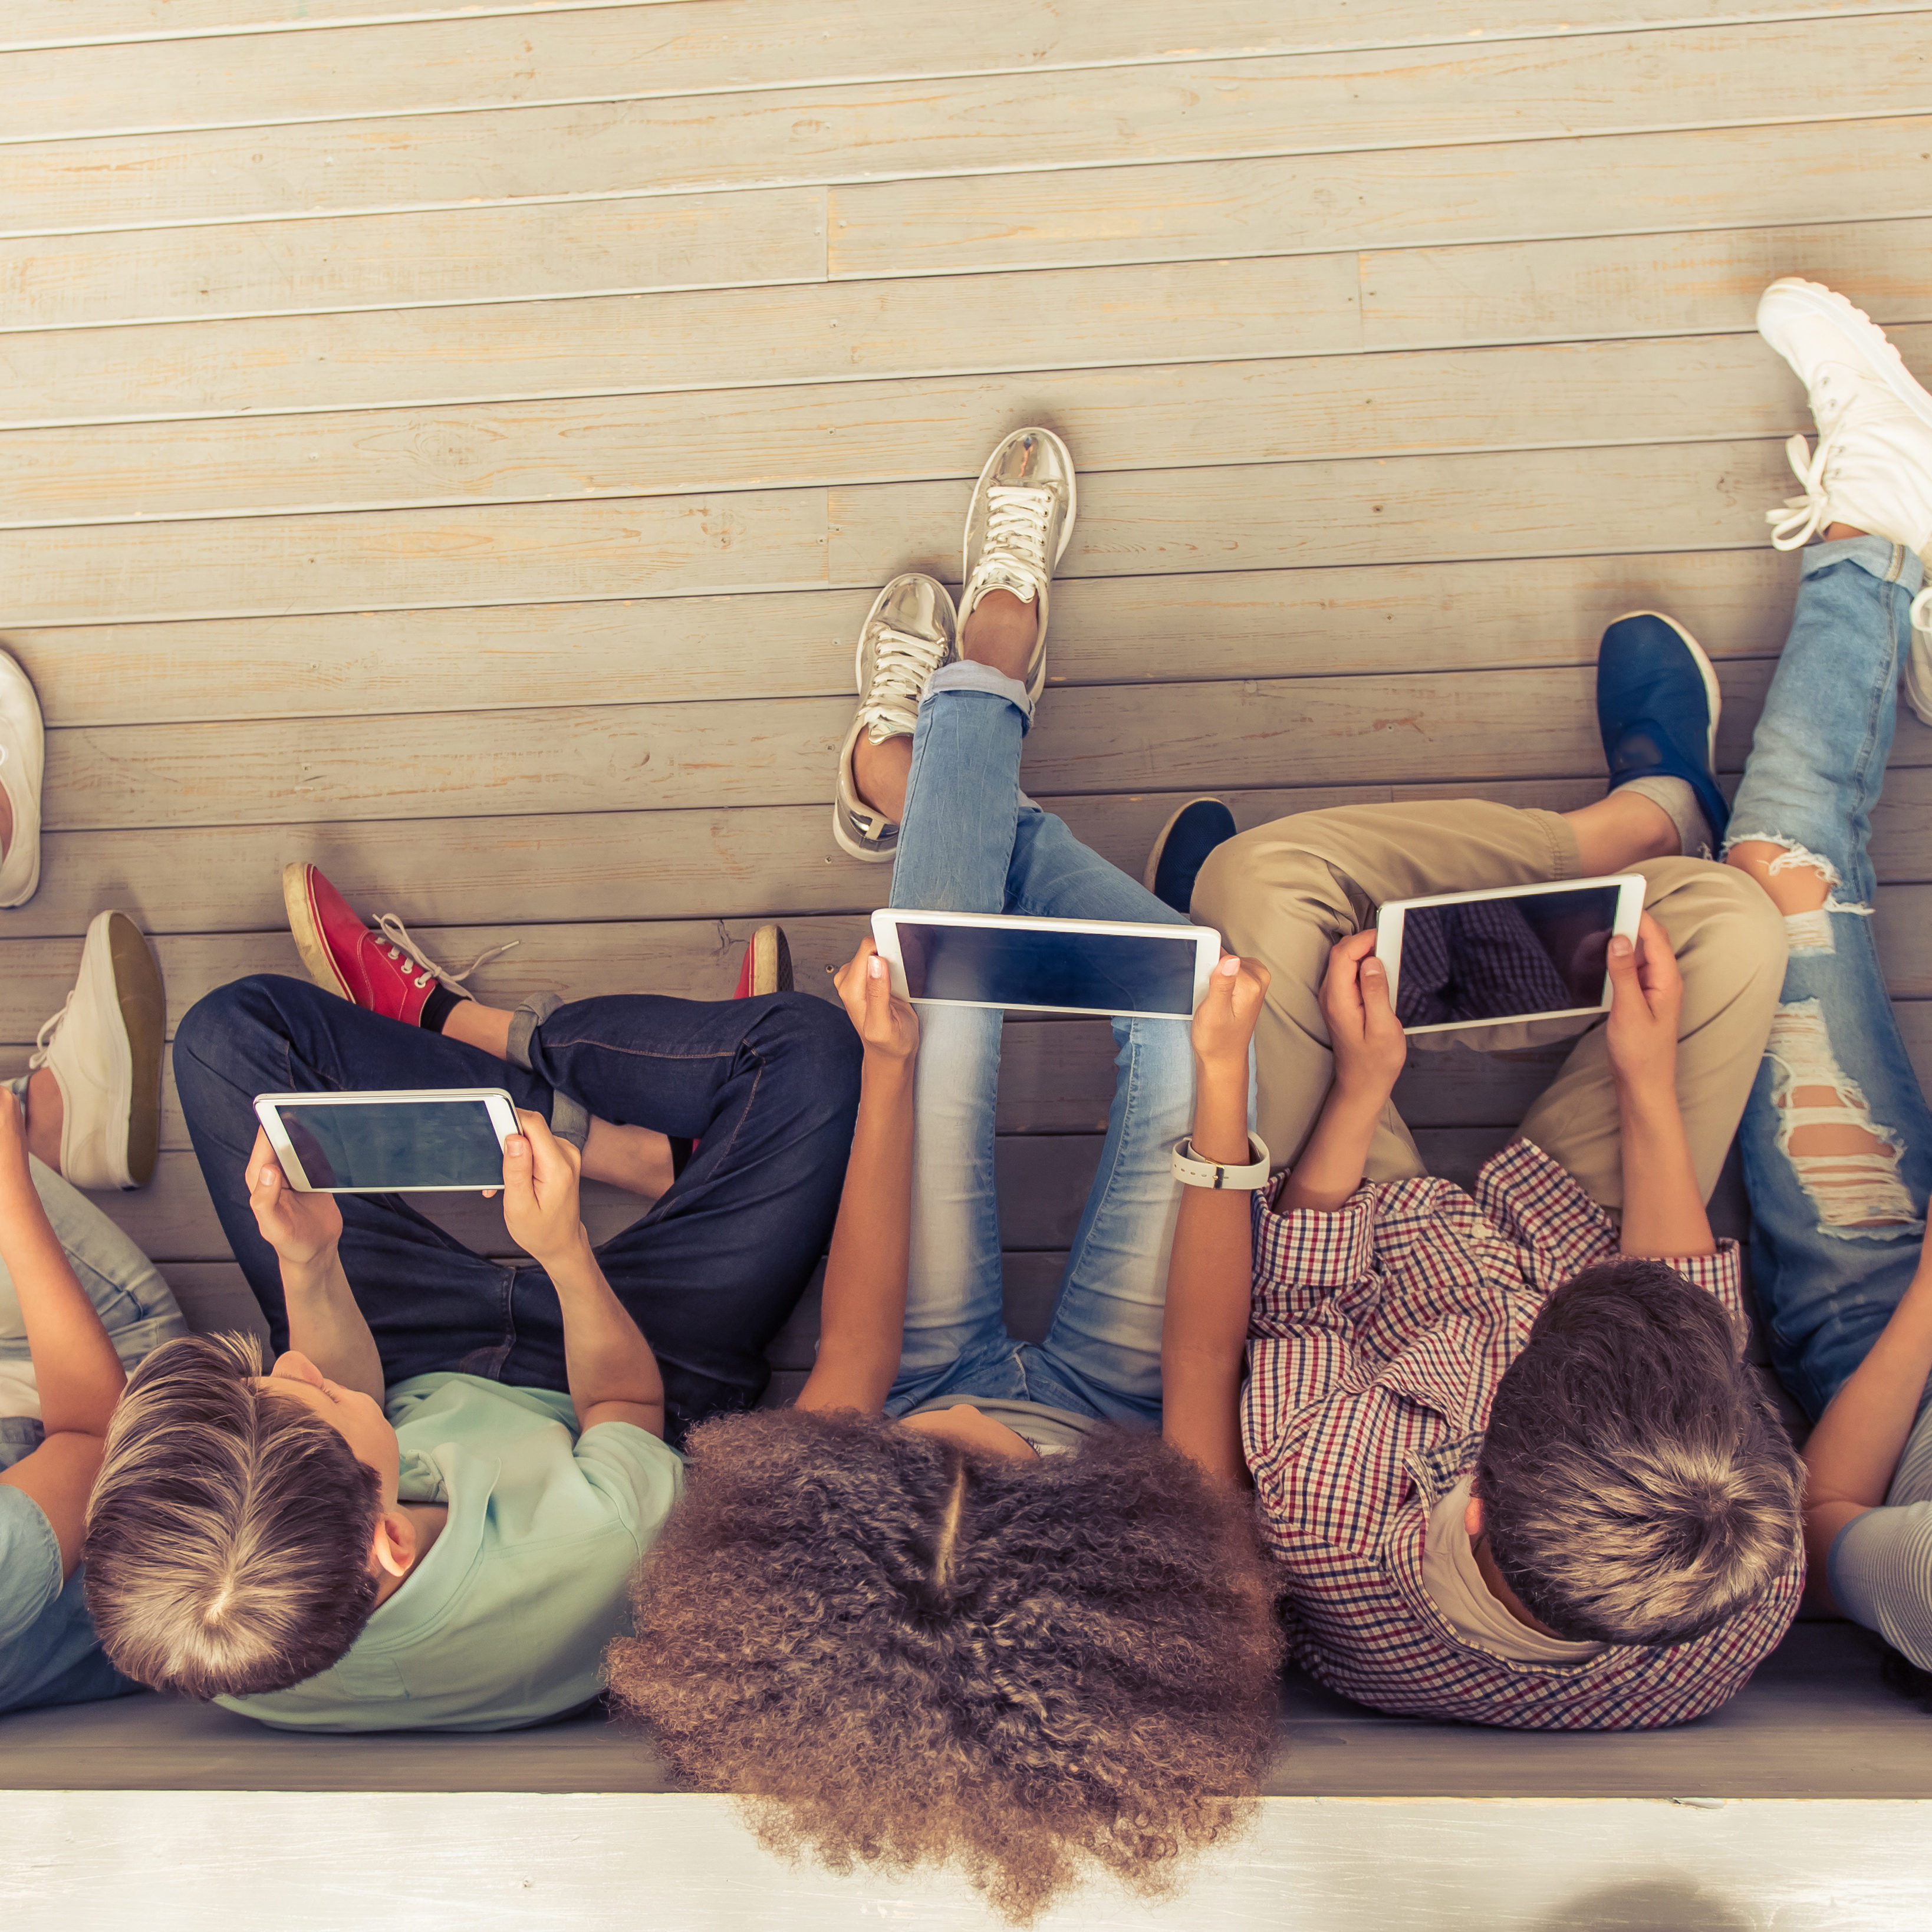 Top view of group of teenage boys and girls using tablets while sitting in row on wooden floor